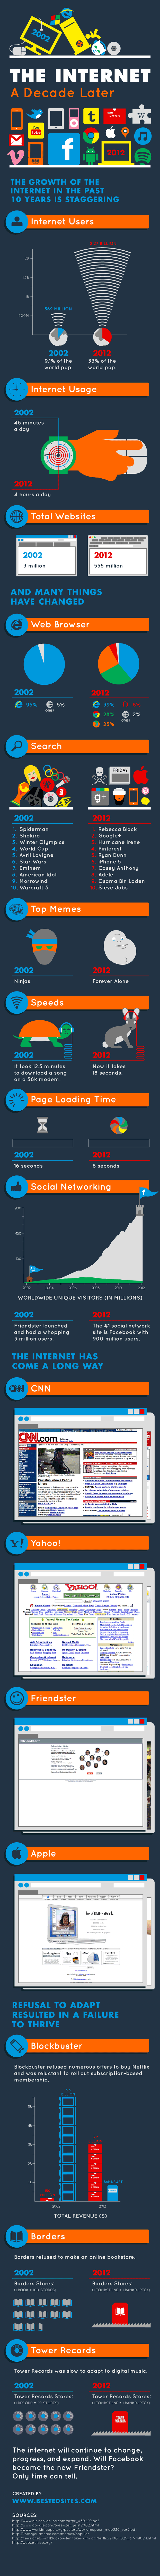 How the Internet Has Changed over a Decade